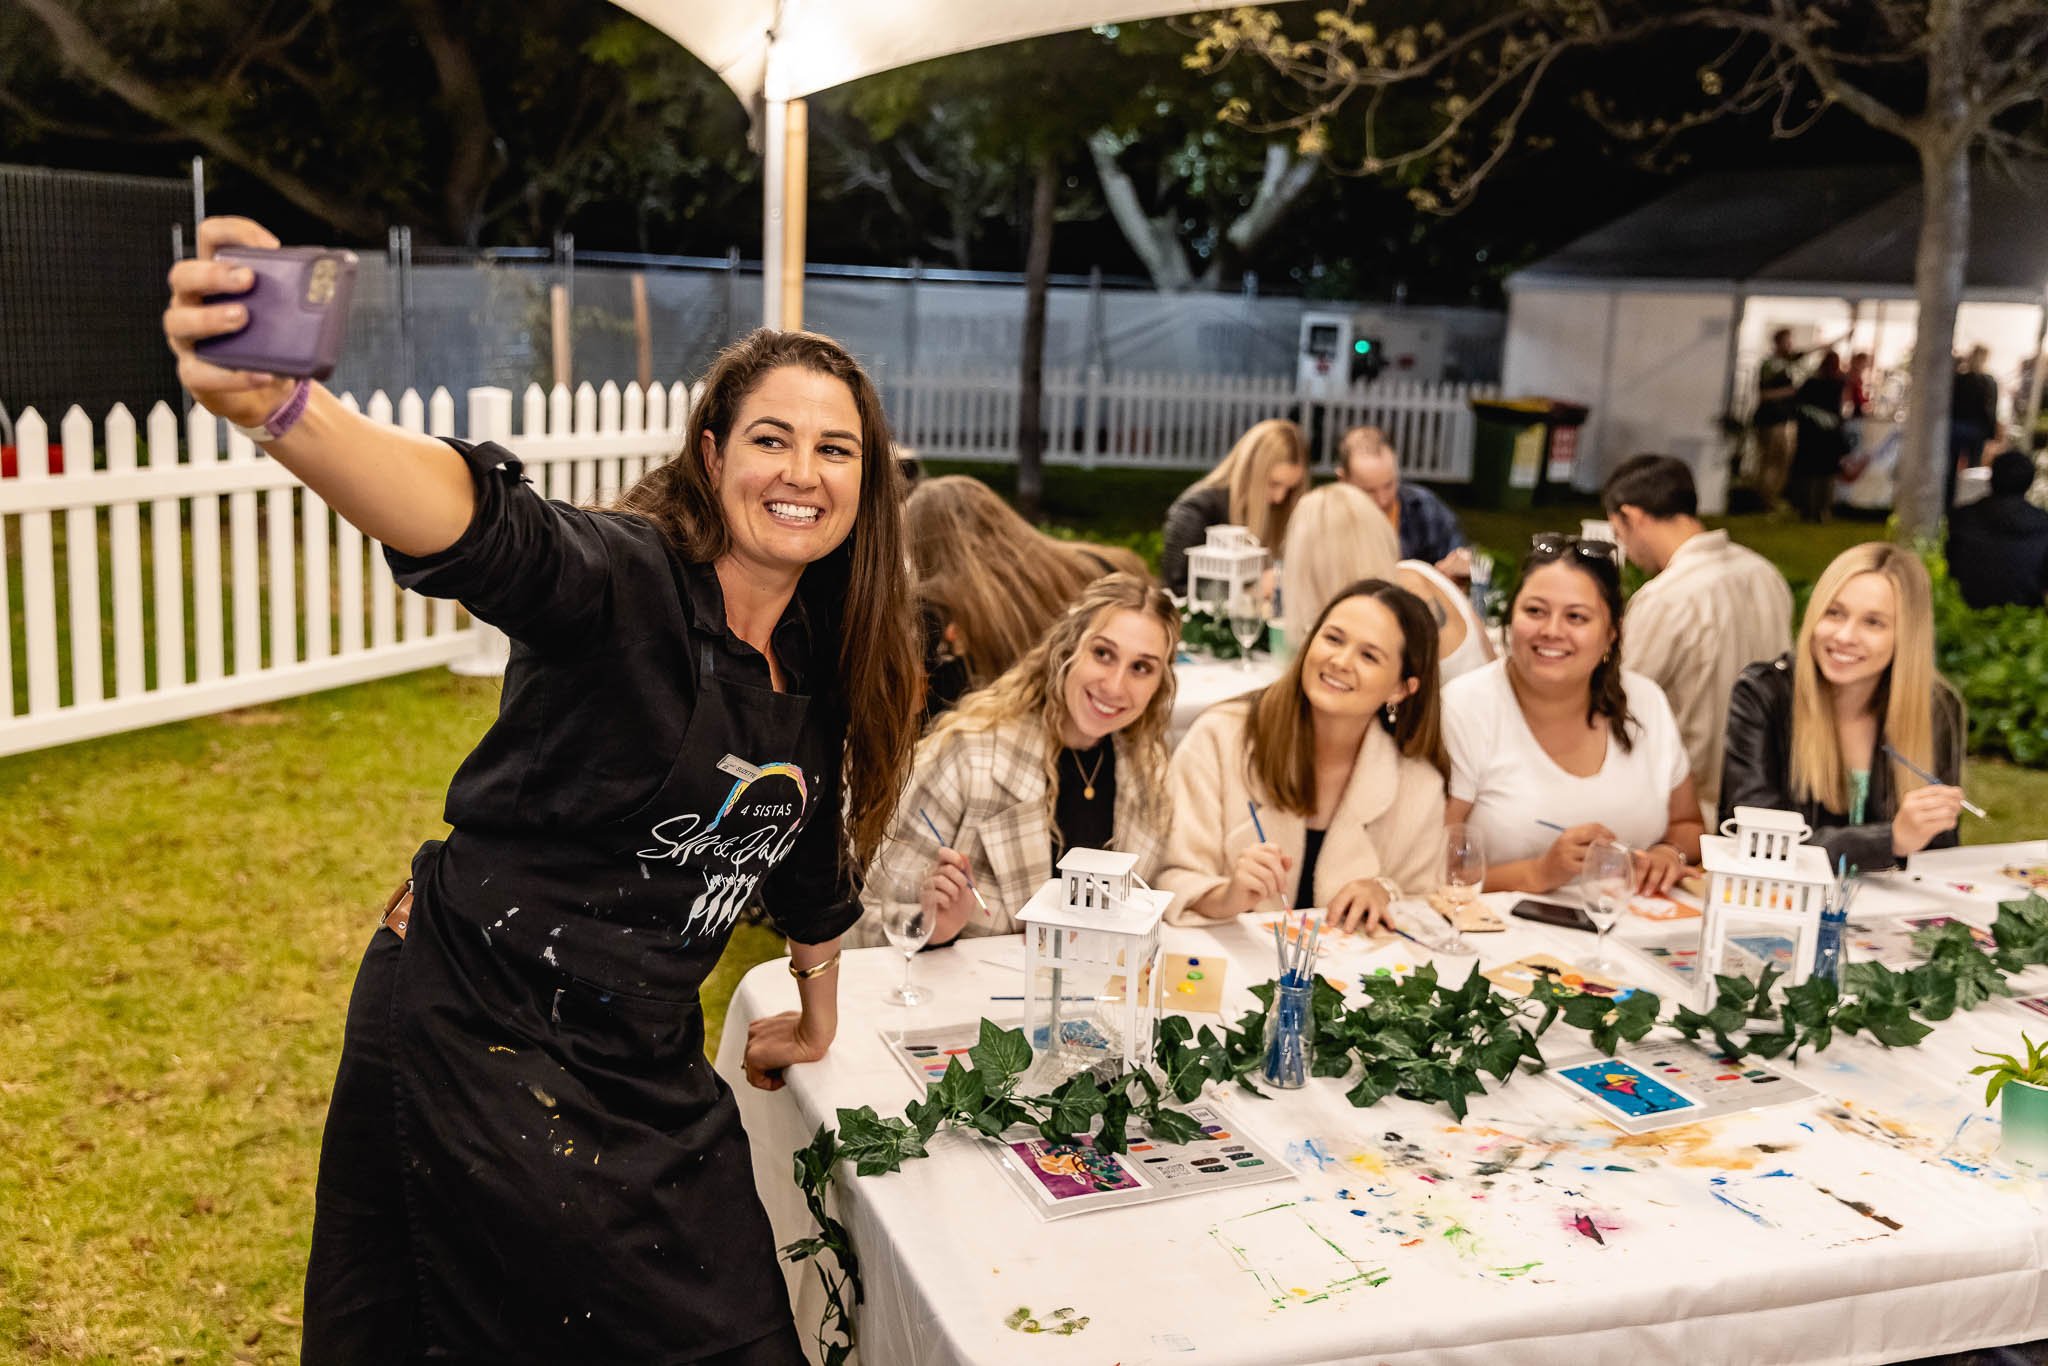 Ammon_Creative-Event_Photography-CMS_Events-UnWined_Subiaco-Image_59.jpg